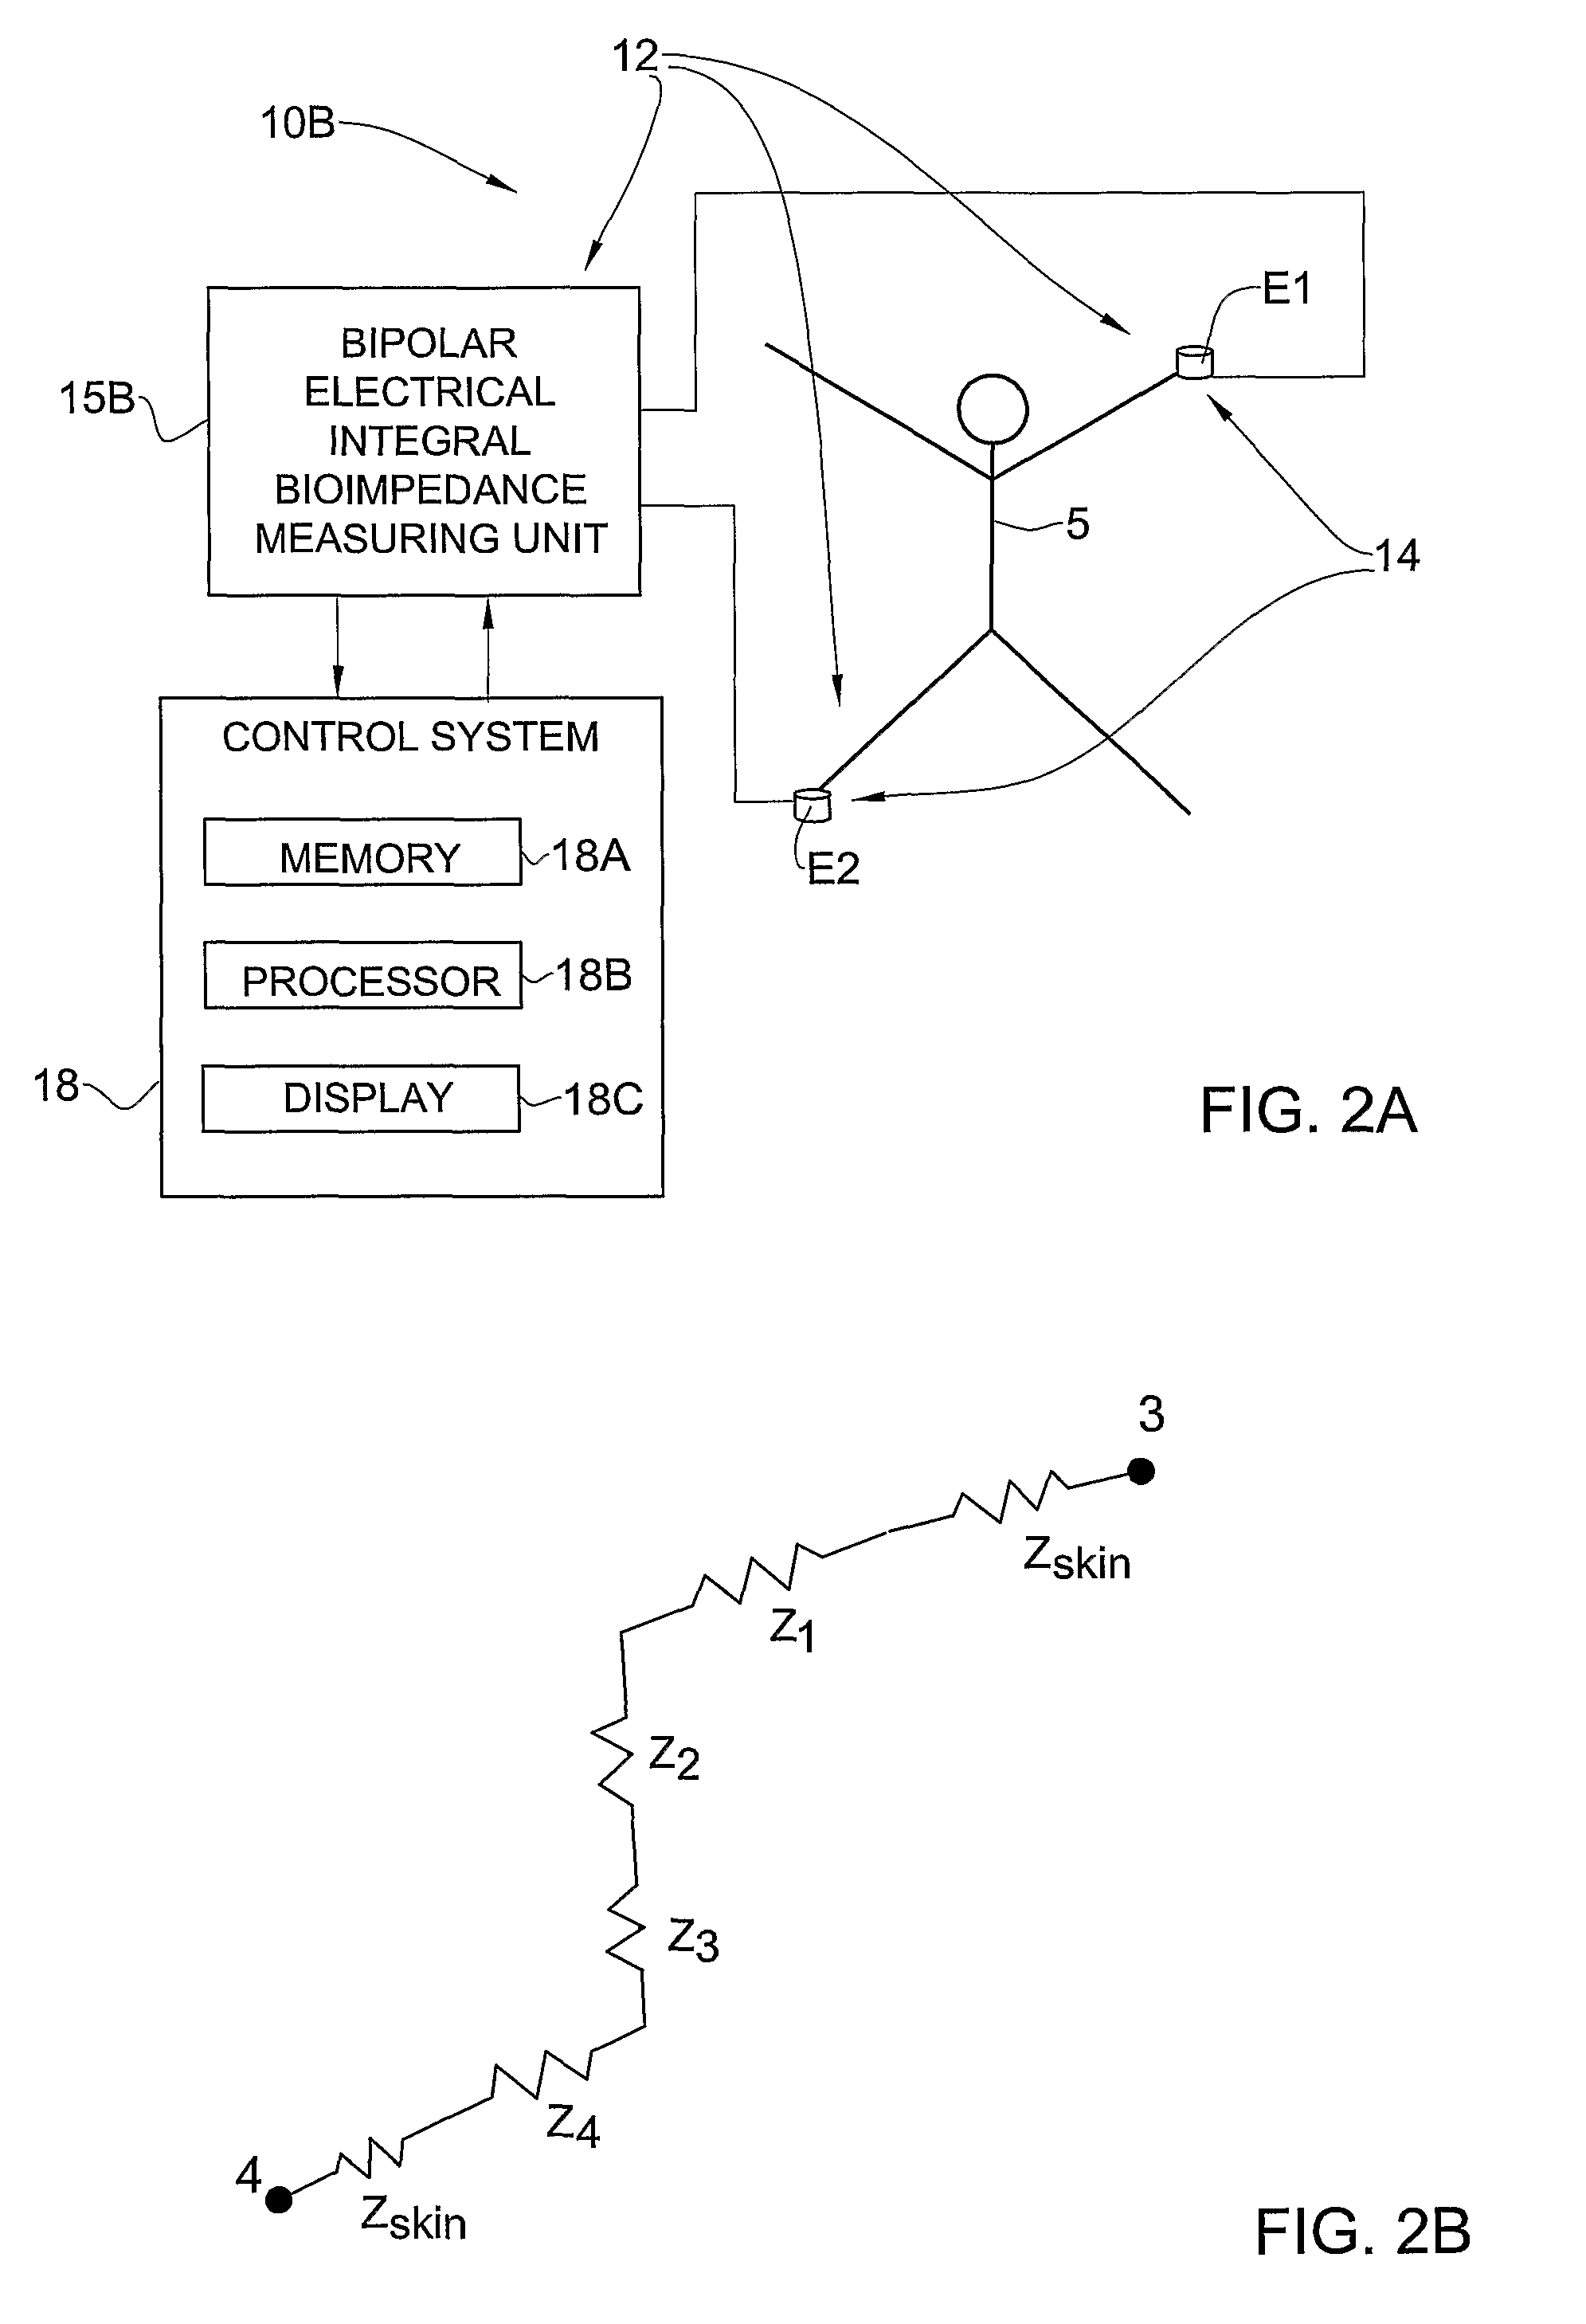 Method and system for non-invasive measurement of cardiac parameters